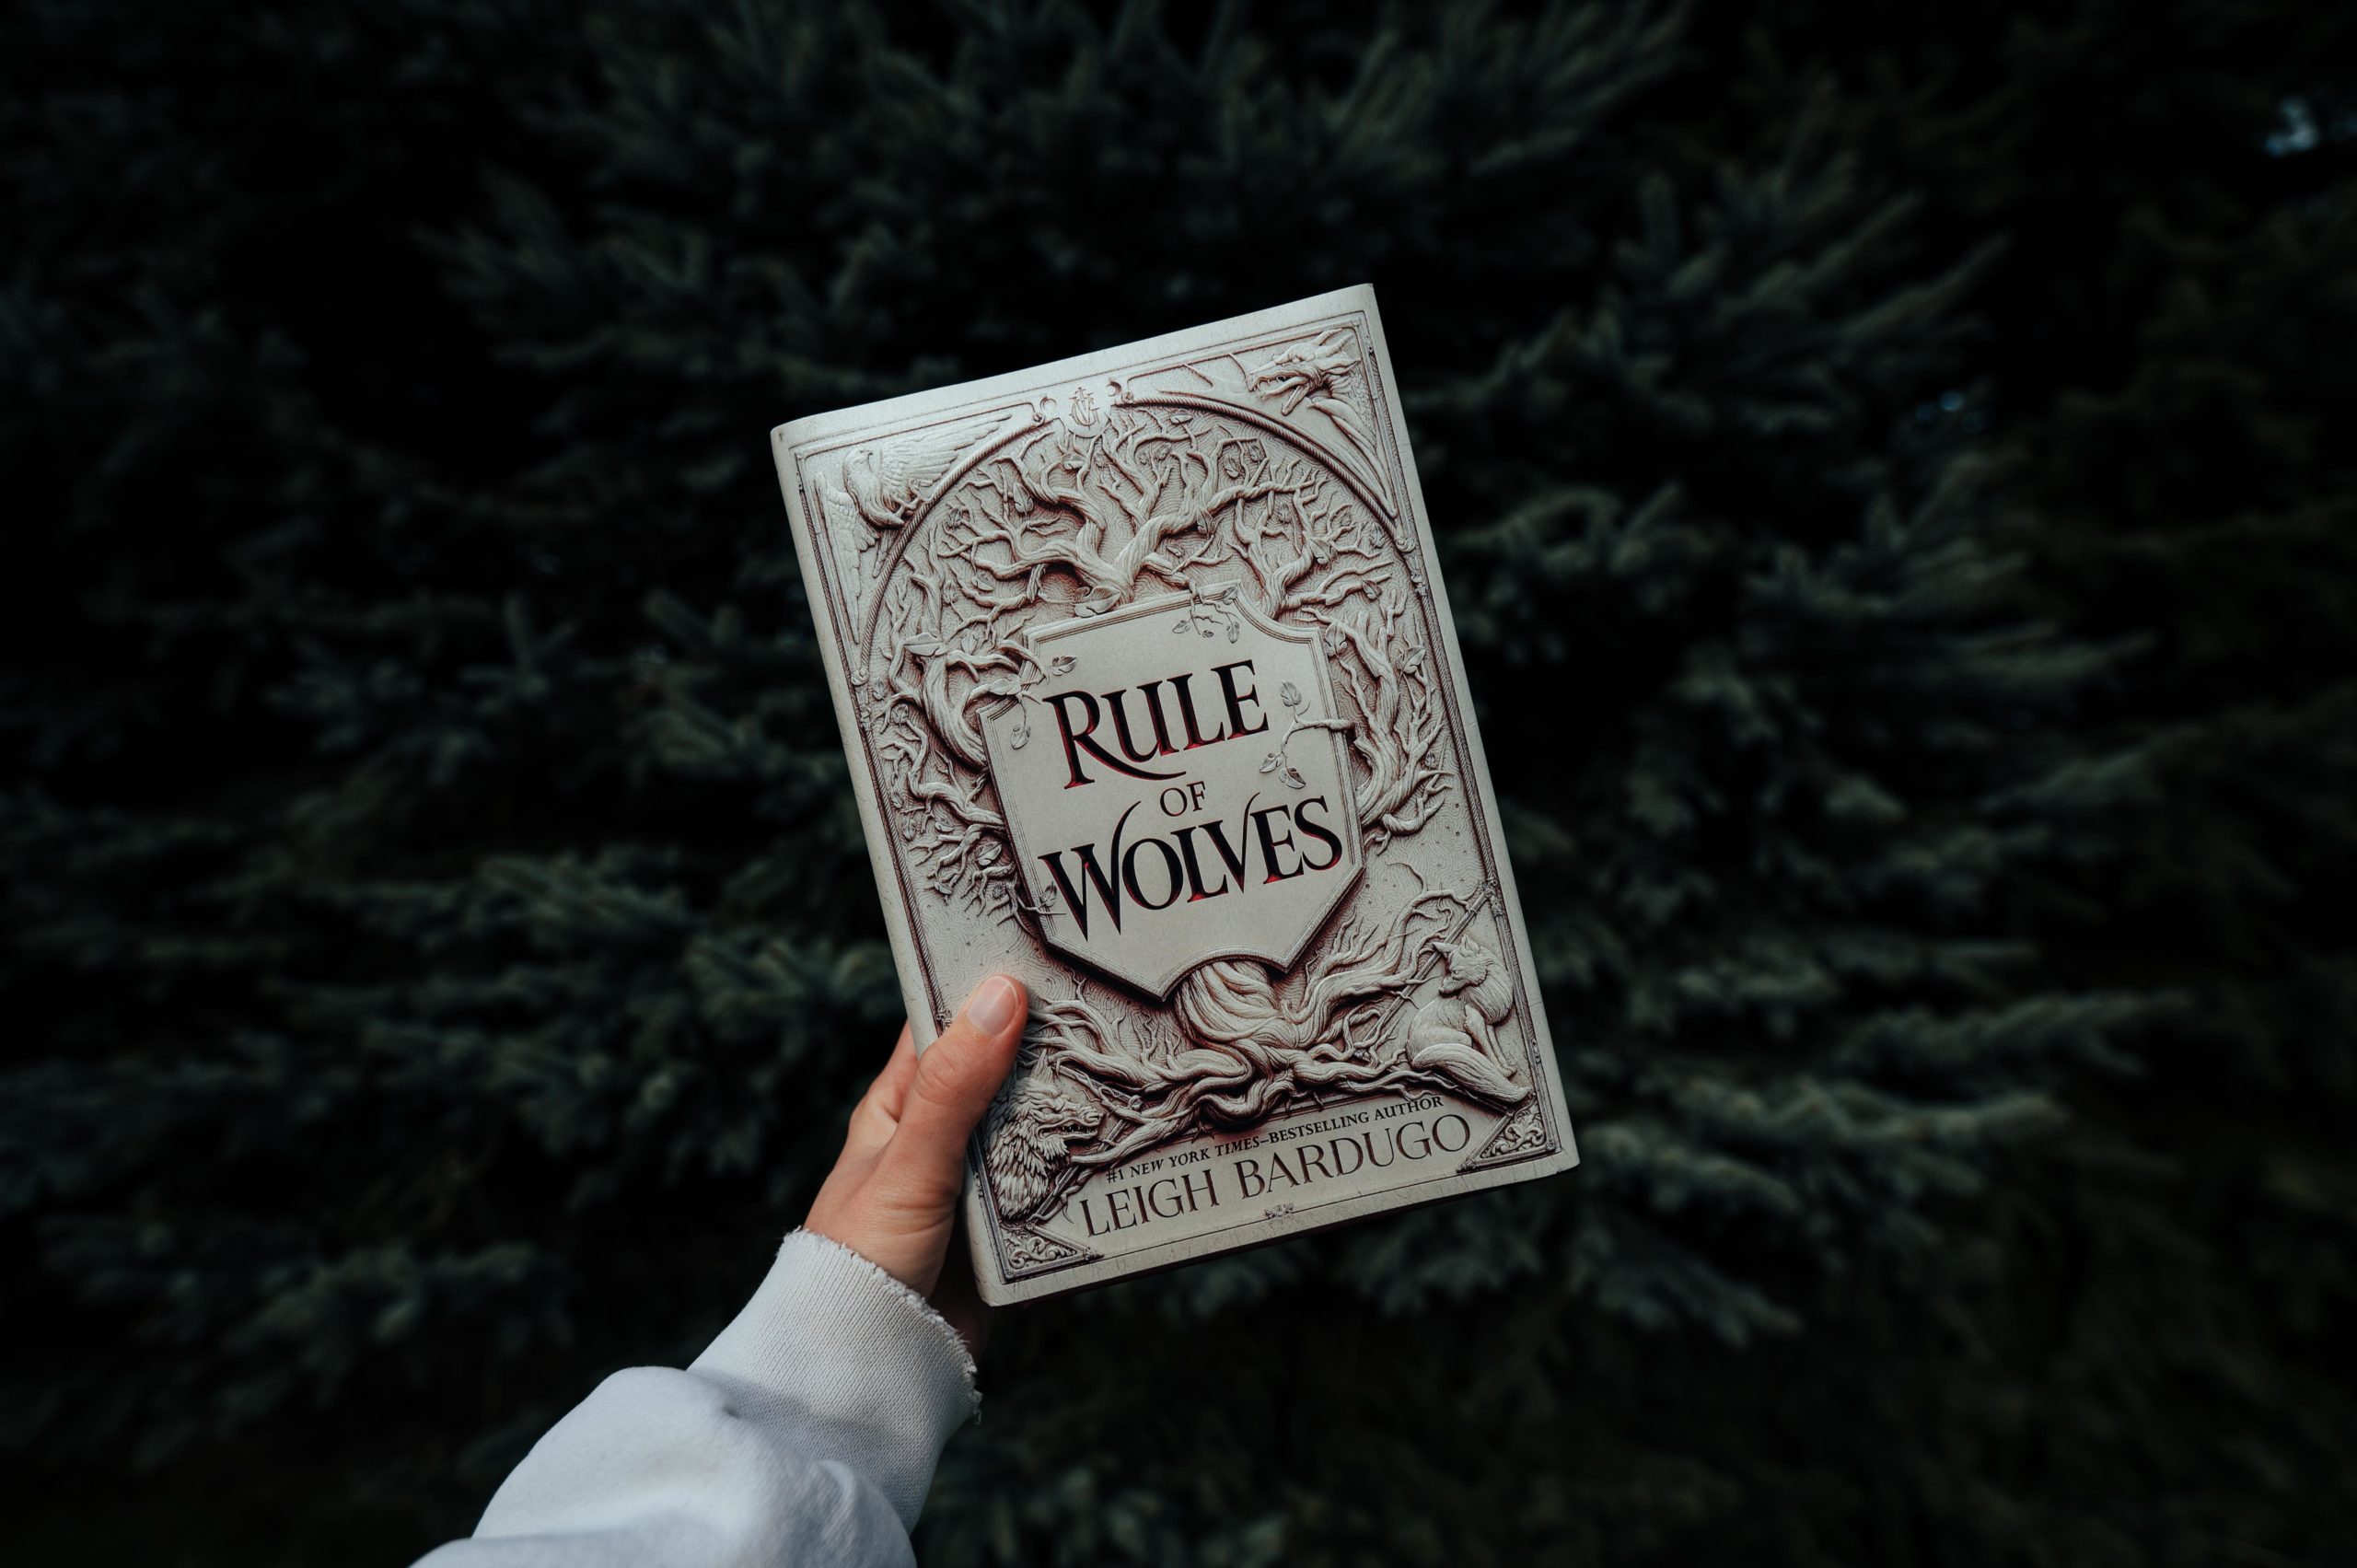 Rule of Wolves by Leigh Bardugo